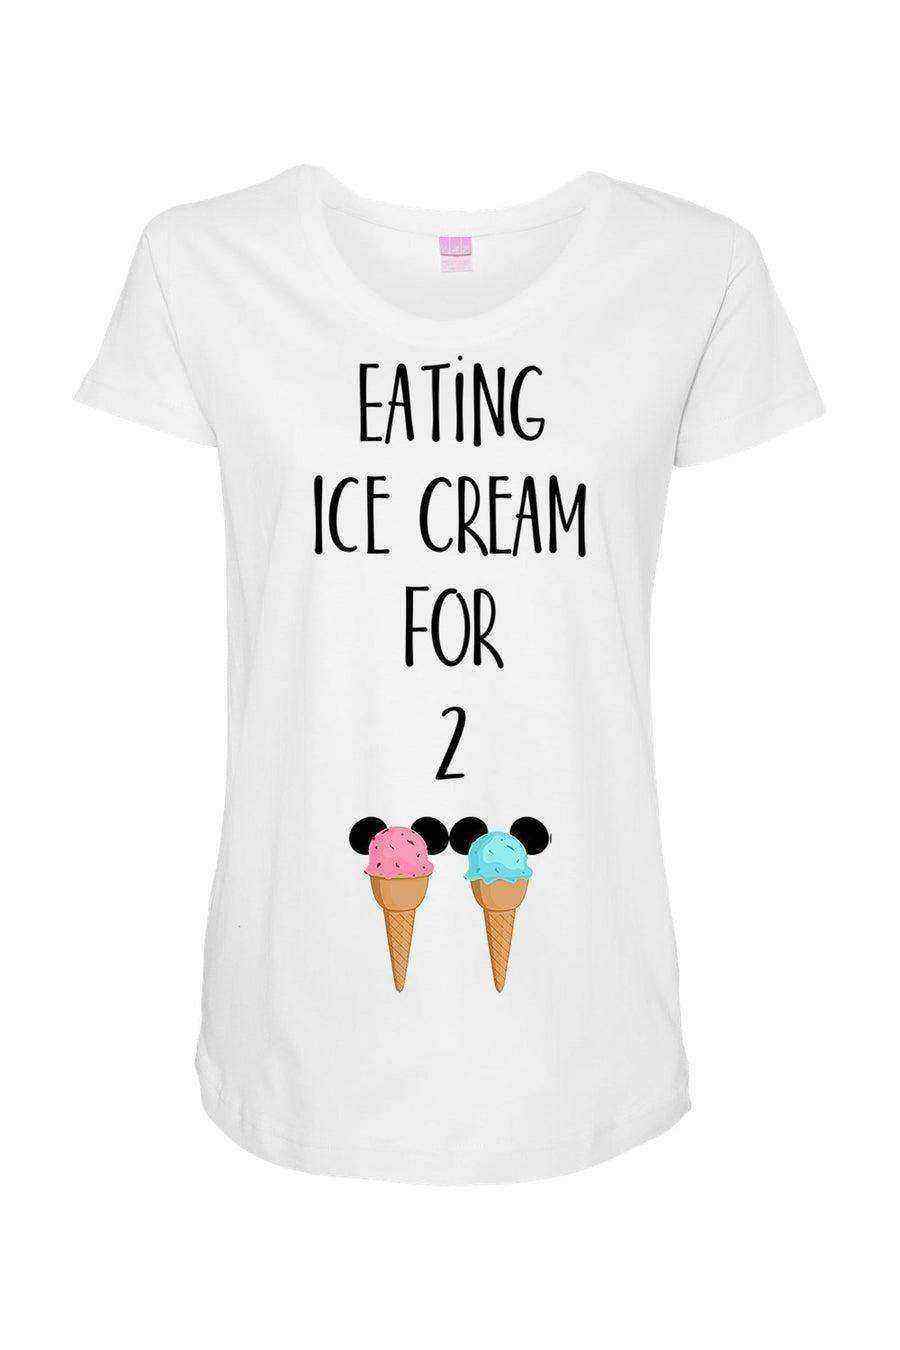 Maternity Shirt | Eating Ice Cream for Two Maternity Shirt - Dylan's Tees